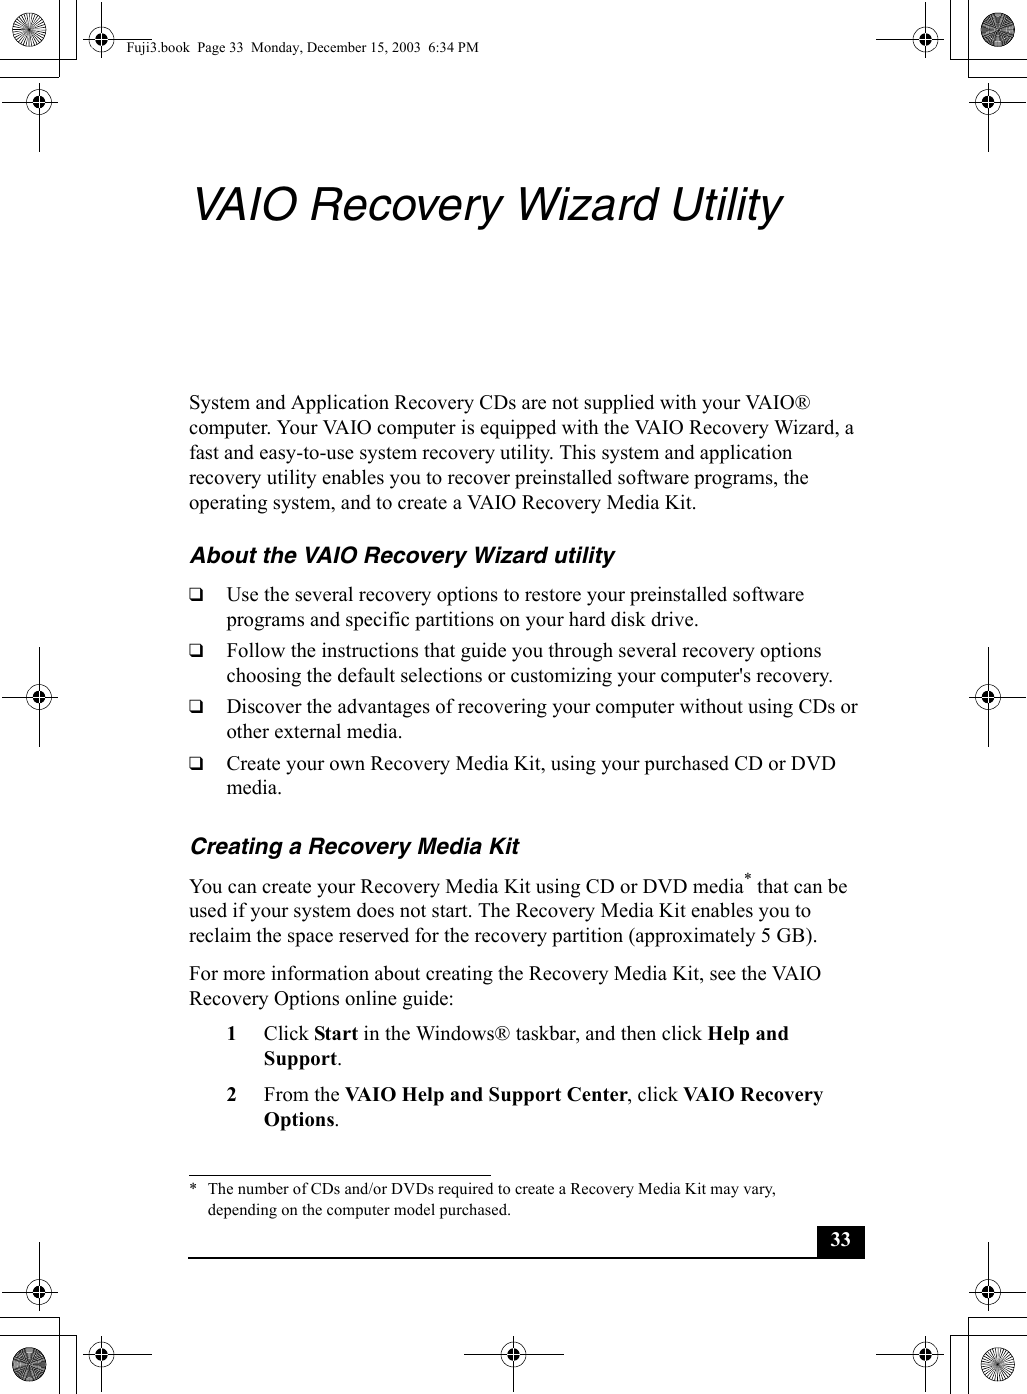 33VAIO Recovery Wizard UtilitySystem and Application Recovery CDs are not supplied with your VAIO® computer. Your VAIO computer is equipped with the VAIO Recovery Wizard, a fast and easy-to-use system recovery utility. This system and application recovery utility enables you to recover preinstalled software programs, the operating system, and to create a VAIO Recovery Media Kit.About the VAIO Recovery Wizard utility❑Use the several recovery options to restore your preinstalled software programs and specific partitions on your hard disk drive.❑Follow the instructions that guide you through several recovery options choosing the default selections or customizing your computer&apos;s recovery.❑Discover the advantages of recovering your computer without using CDs or other external media.❑Create your own Recovery Media Kit, using your purchased CD or DVD media.Creating a Recovery Media KitYou can create your Recovery Media Kit using CD or DVD media* that can be used if your system does not start. The Recovery Media Kit enables you to reclaim the space reserved for the recovery partition (approximately 5 GB).For more information about creating the Recovery Media Kit, see the VAIO Recovery Options online guide:1Click Start in the Windows® taskbar, and then click Help and Support.2From the VAIO Help and Support Center, click VAIO Recovery Options.* The number of CDs and/or DVDs required to create a Recovery Media Kit may vary, depending on the computer model purchased.Fuji3.book  Page 33  Monday, December 15, 2003  6:34 PM